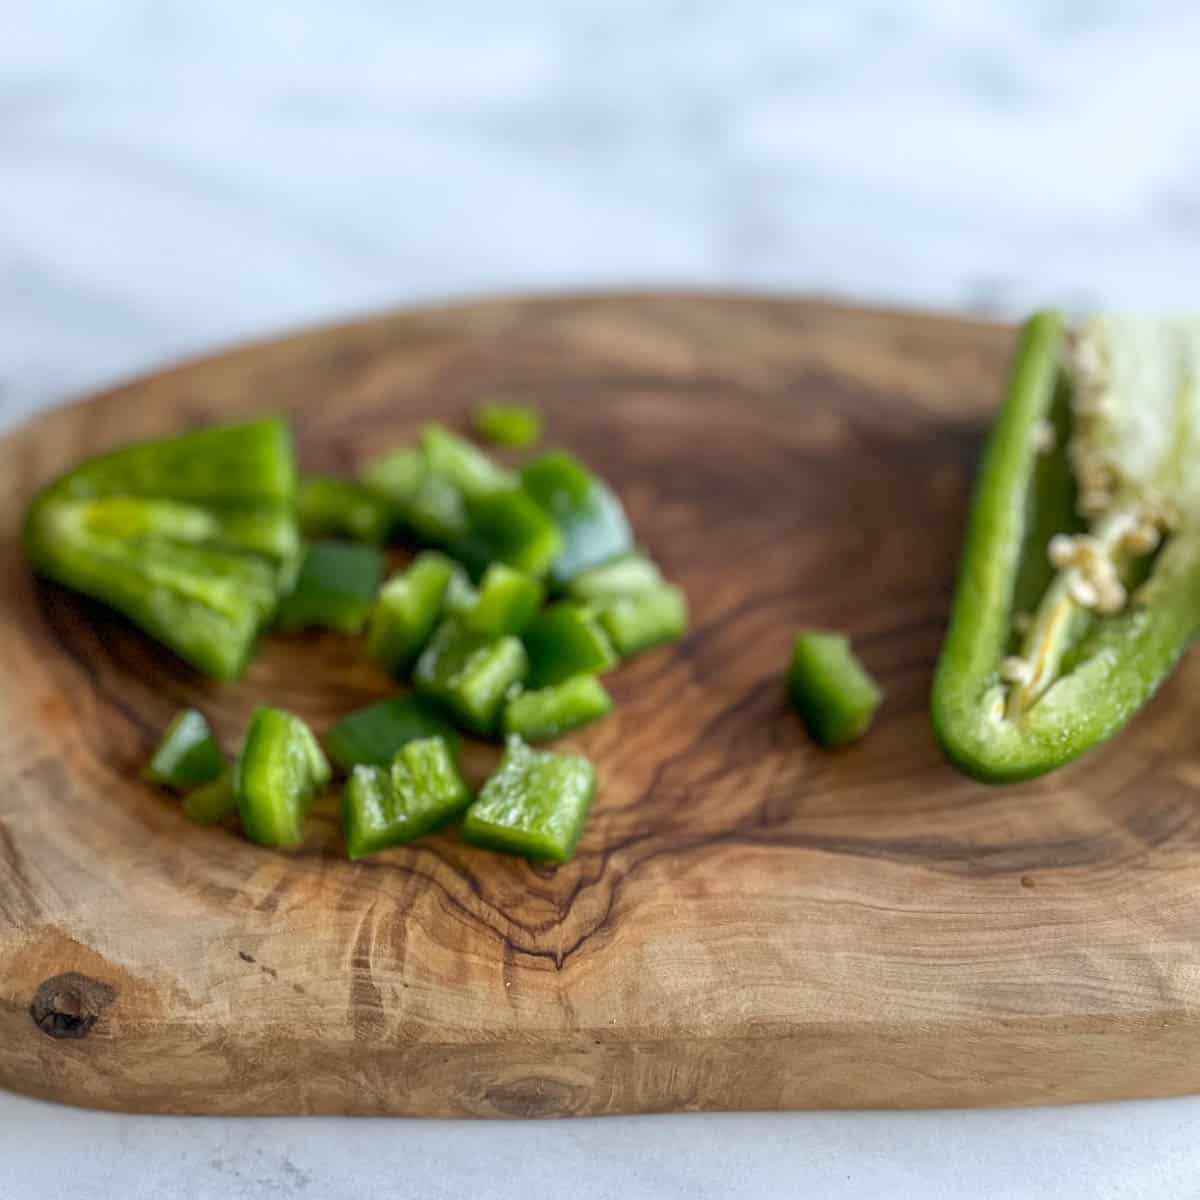 The sliced jalapeno has been cut widthwise to create a small dice.